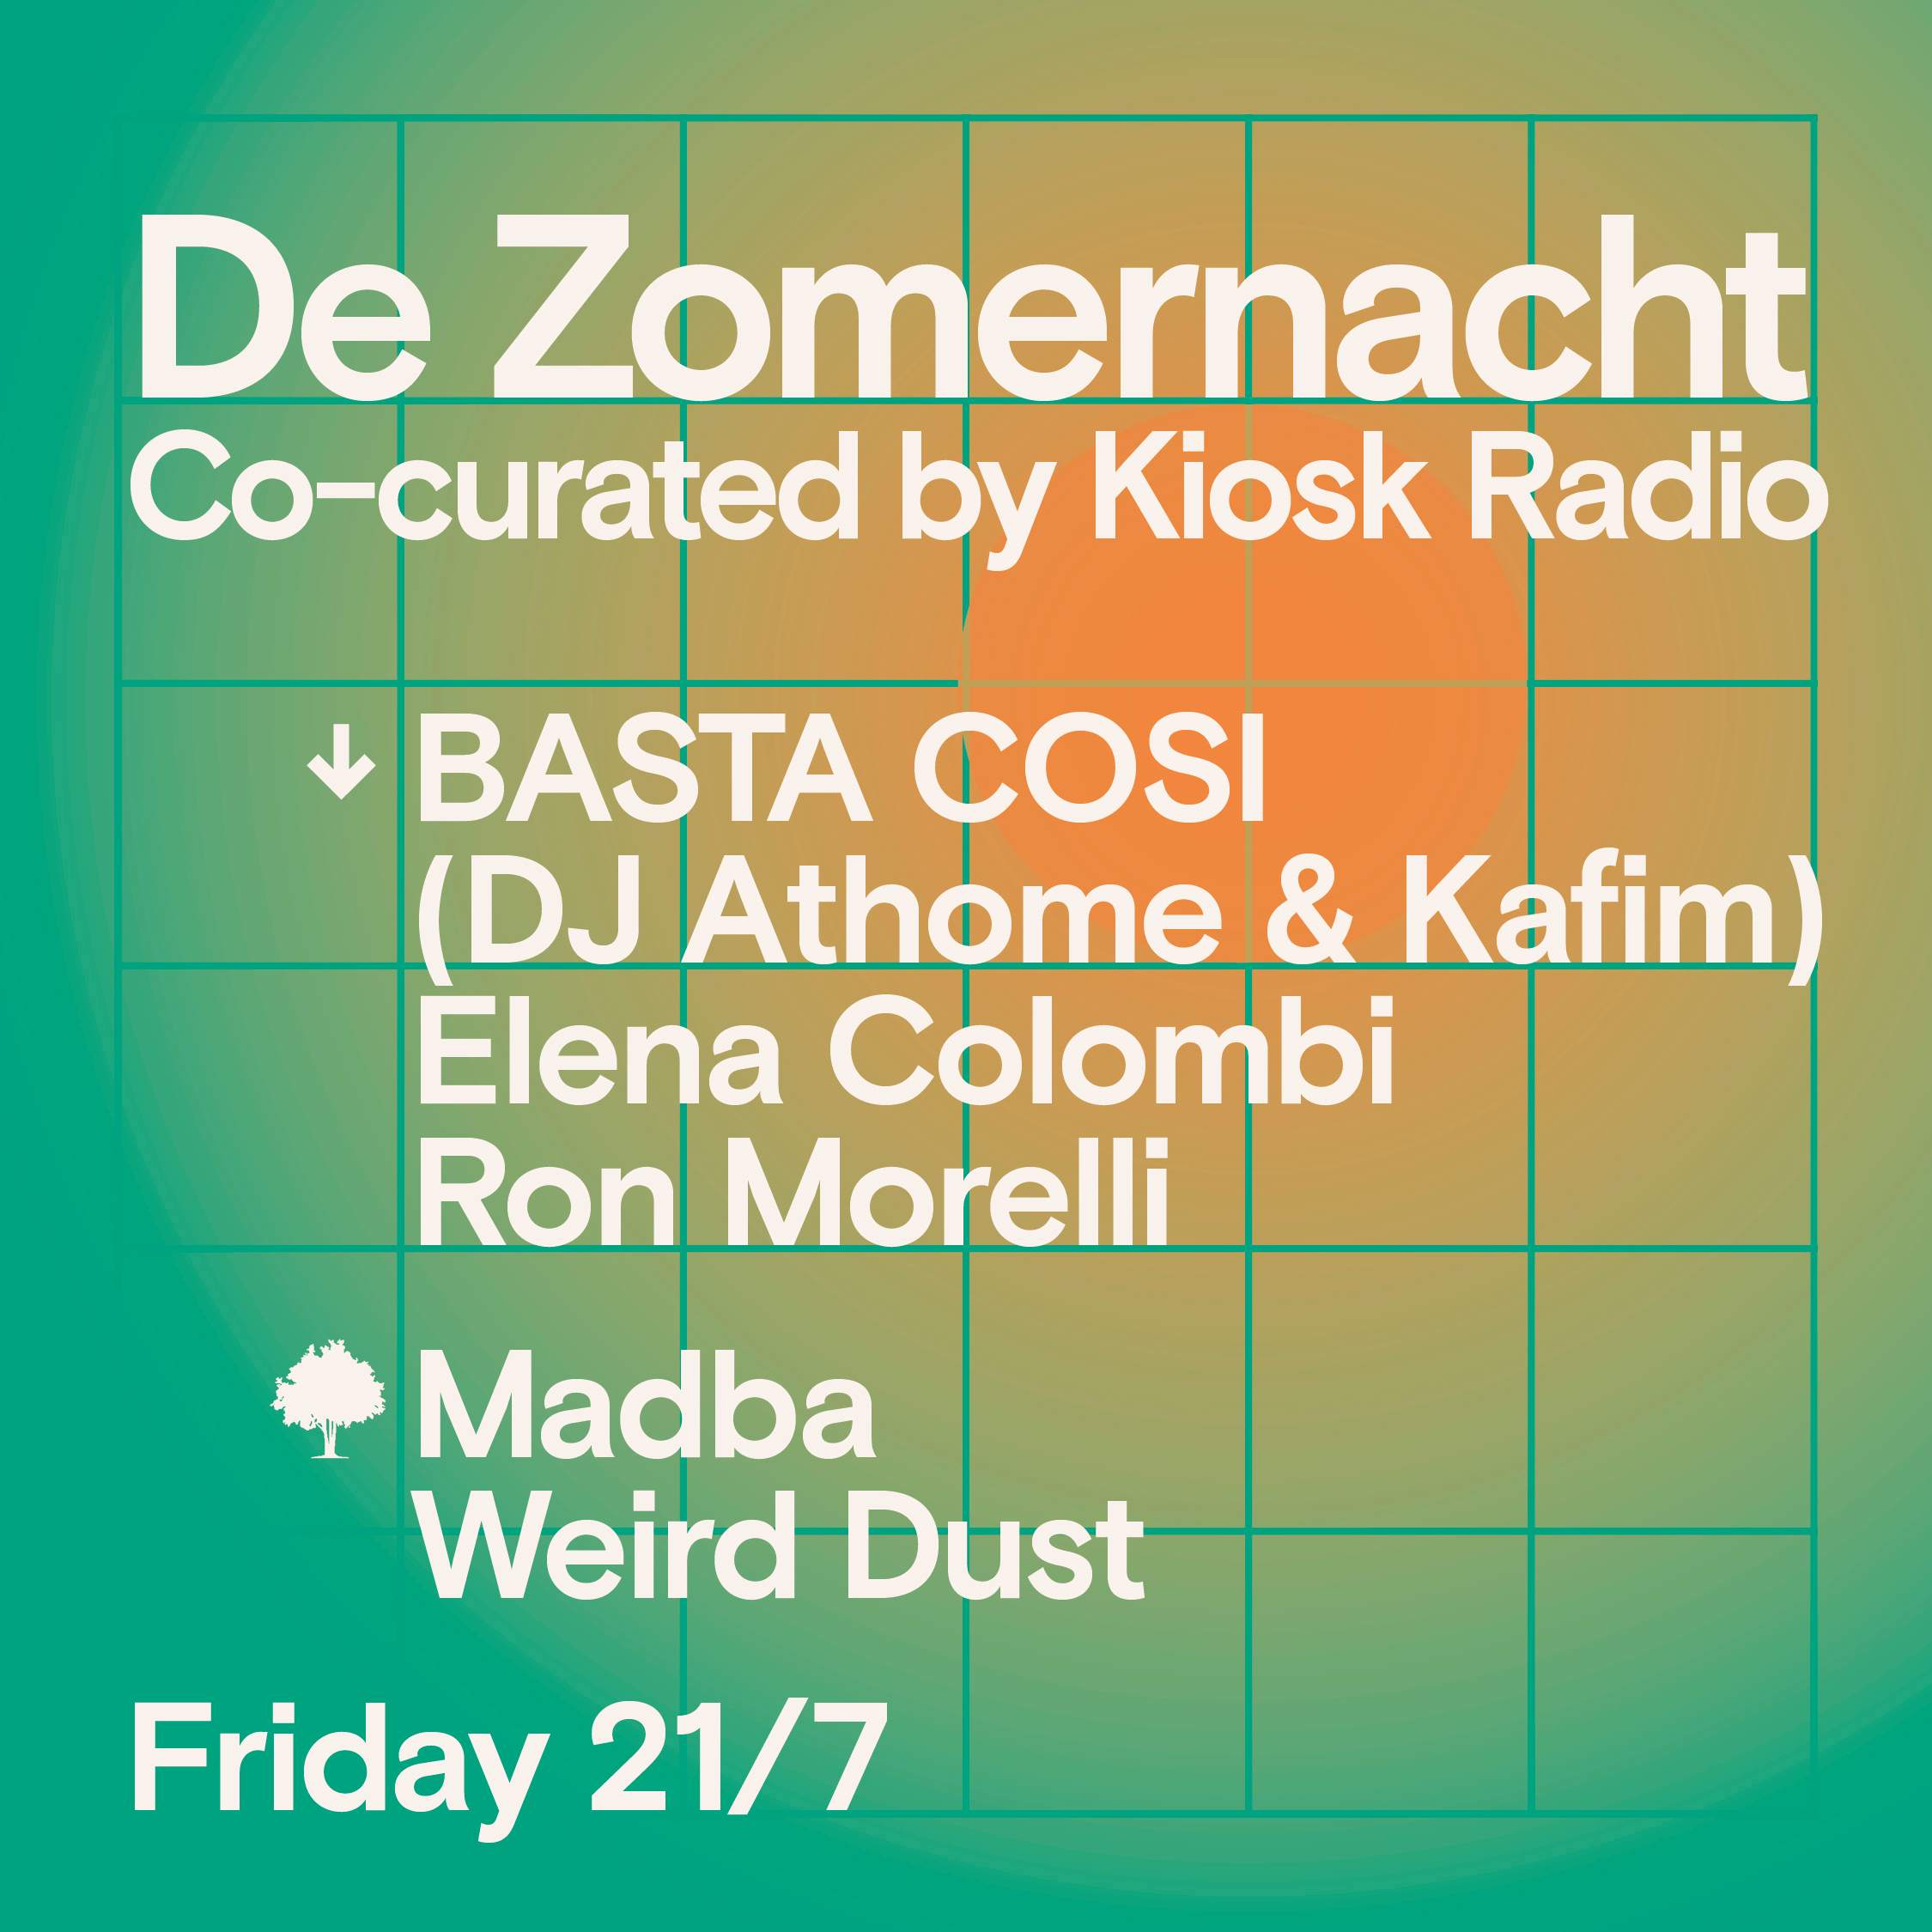 De Zomernacht co-curated by Kiosk Radio - フライヤー表